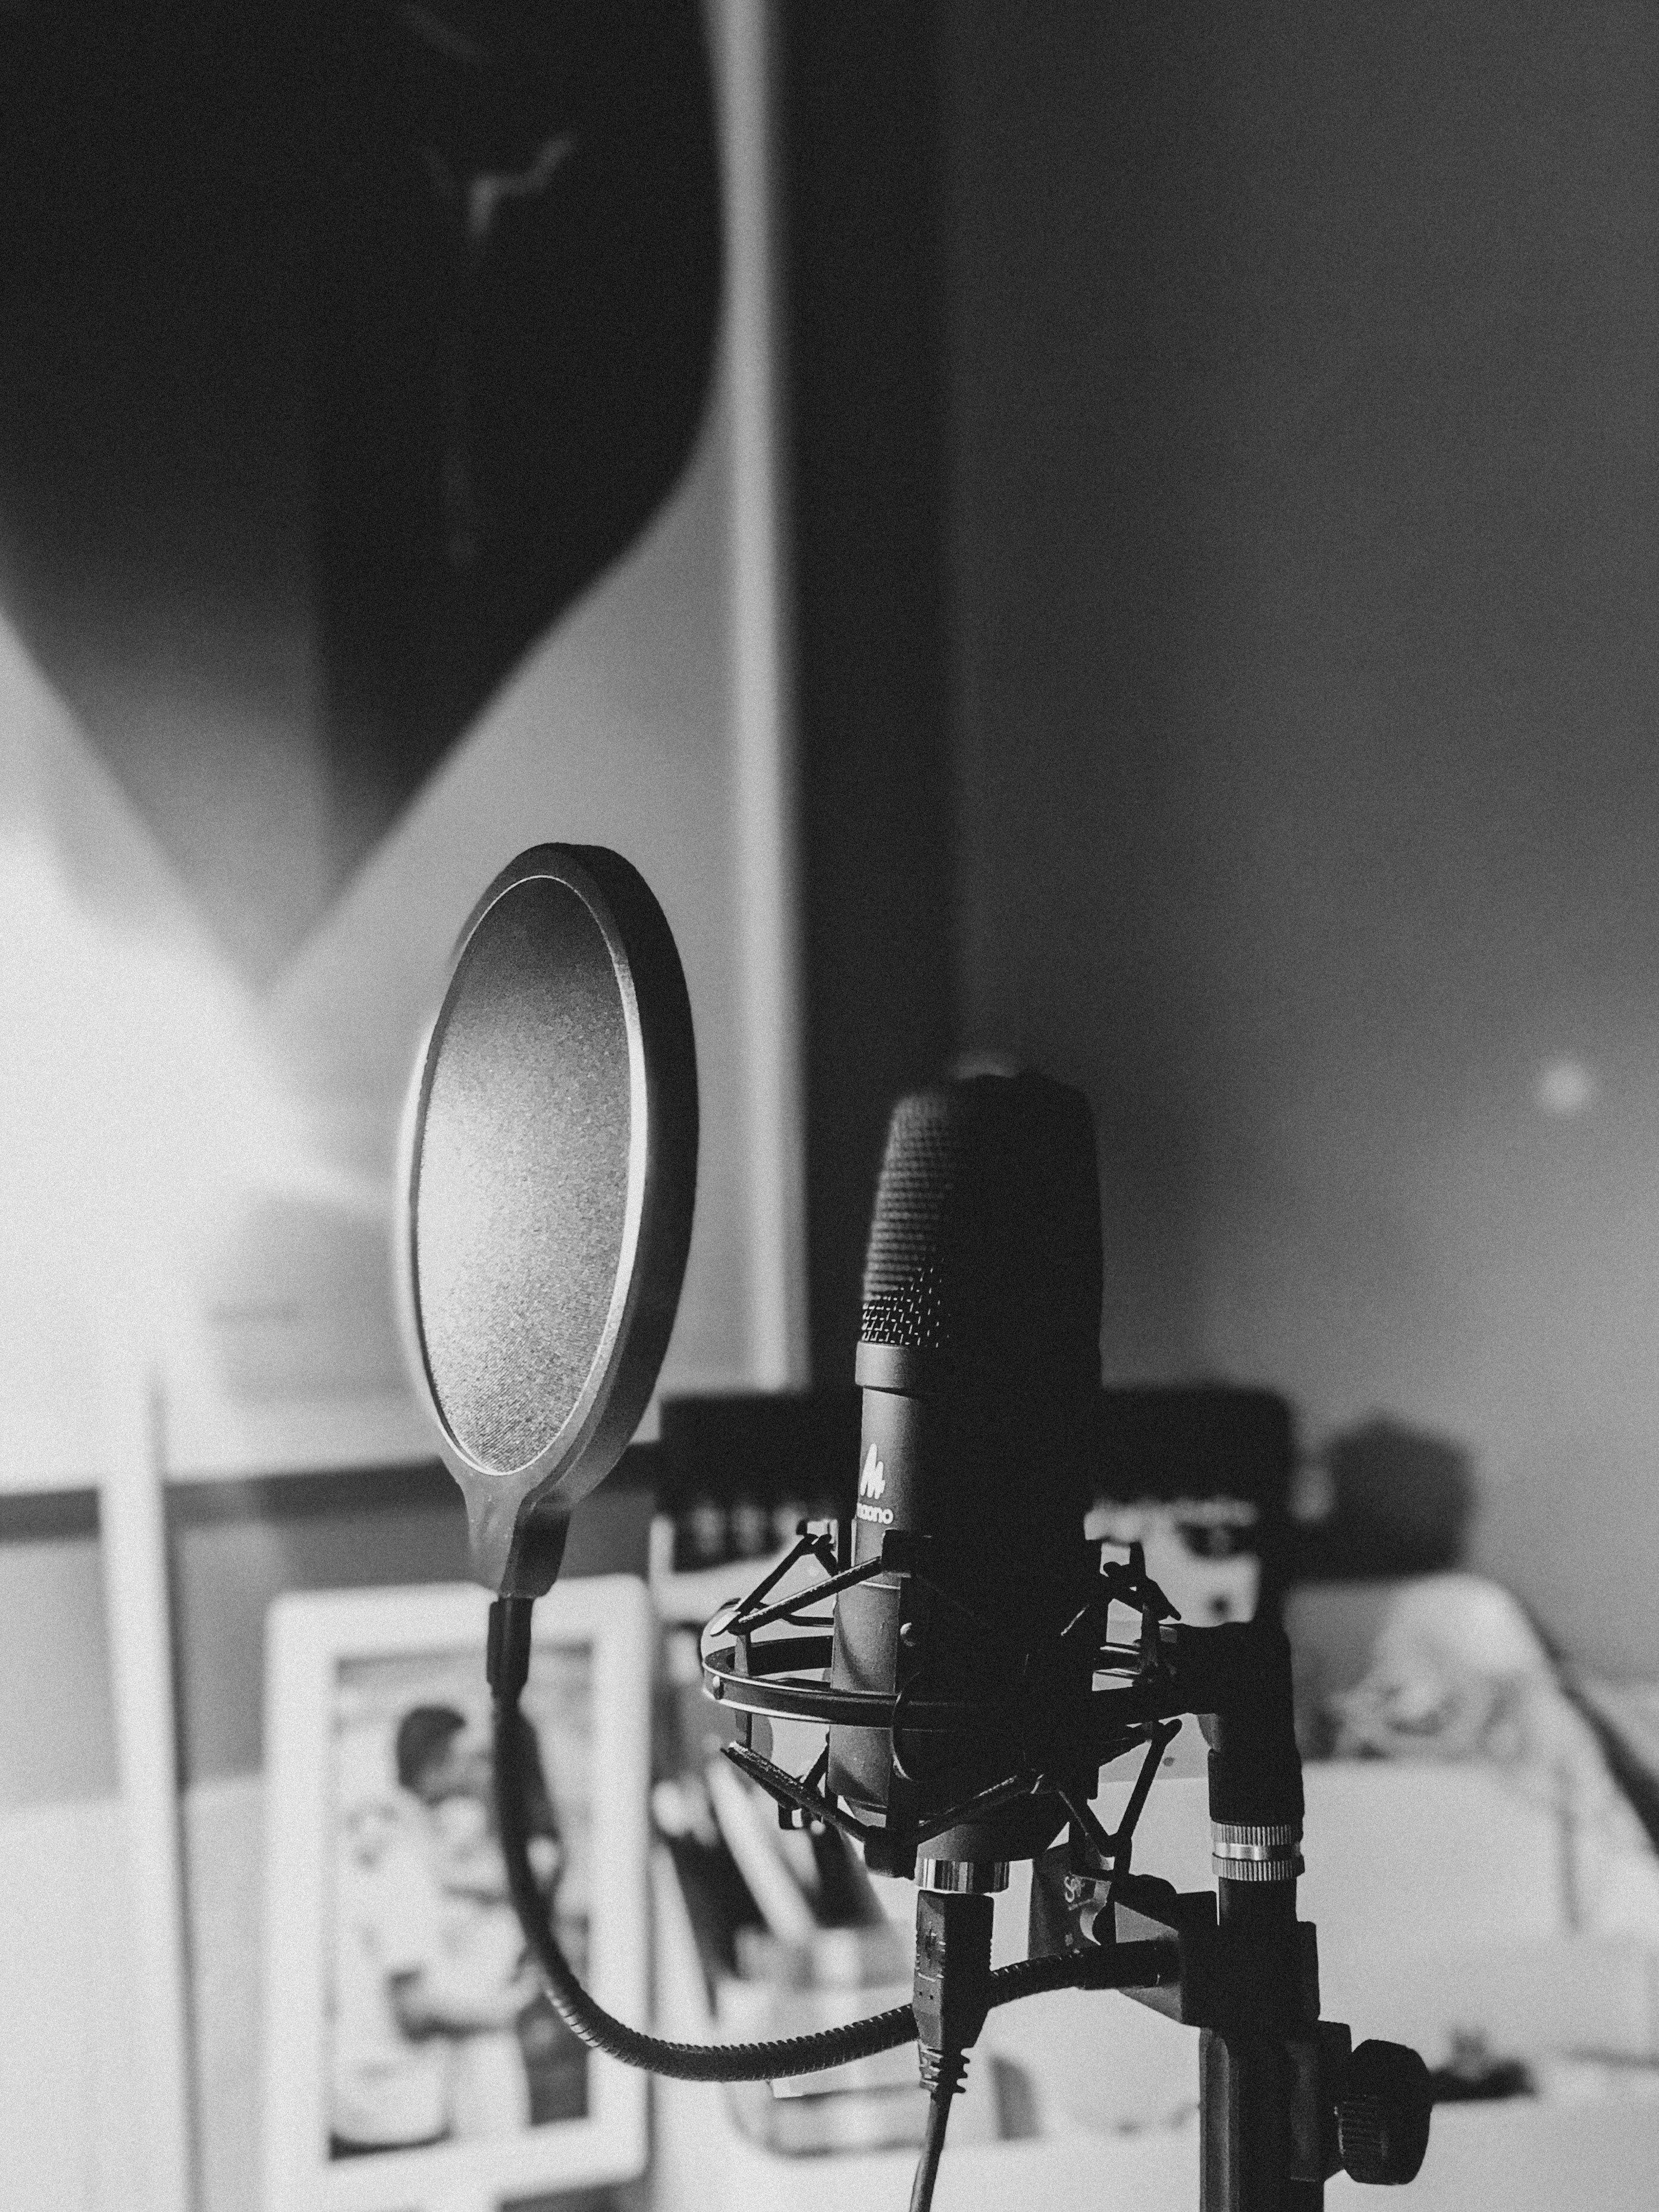 Black and white image of a microphone with a pop filter